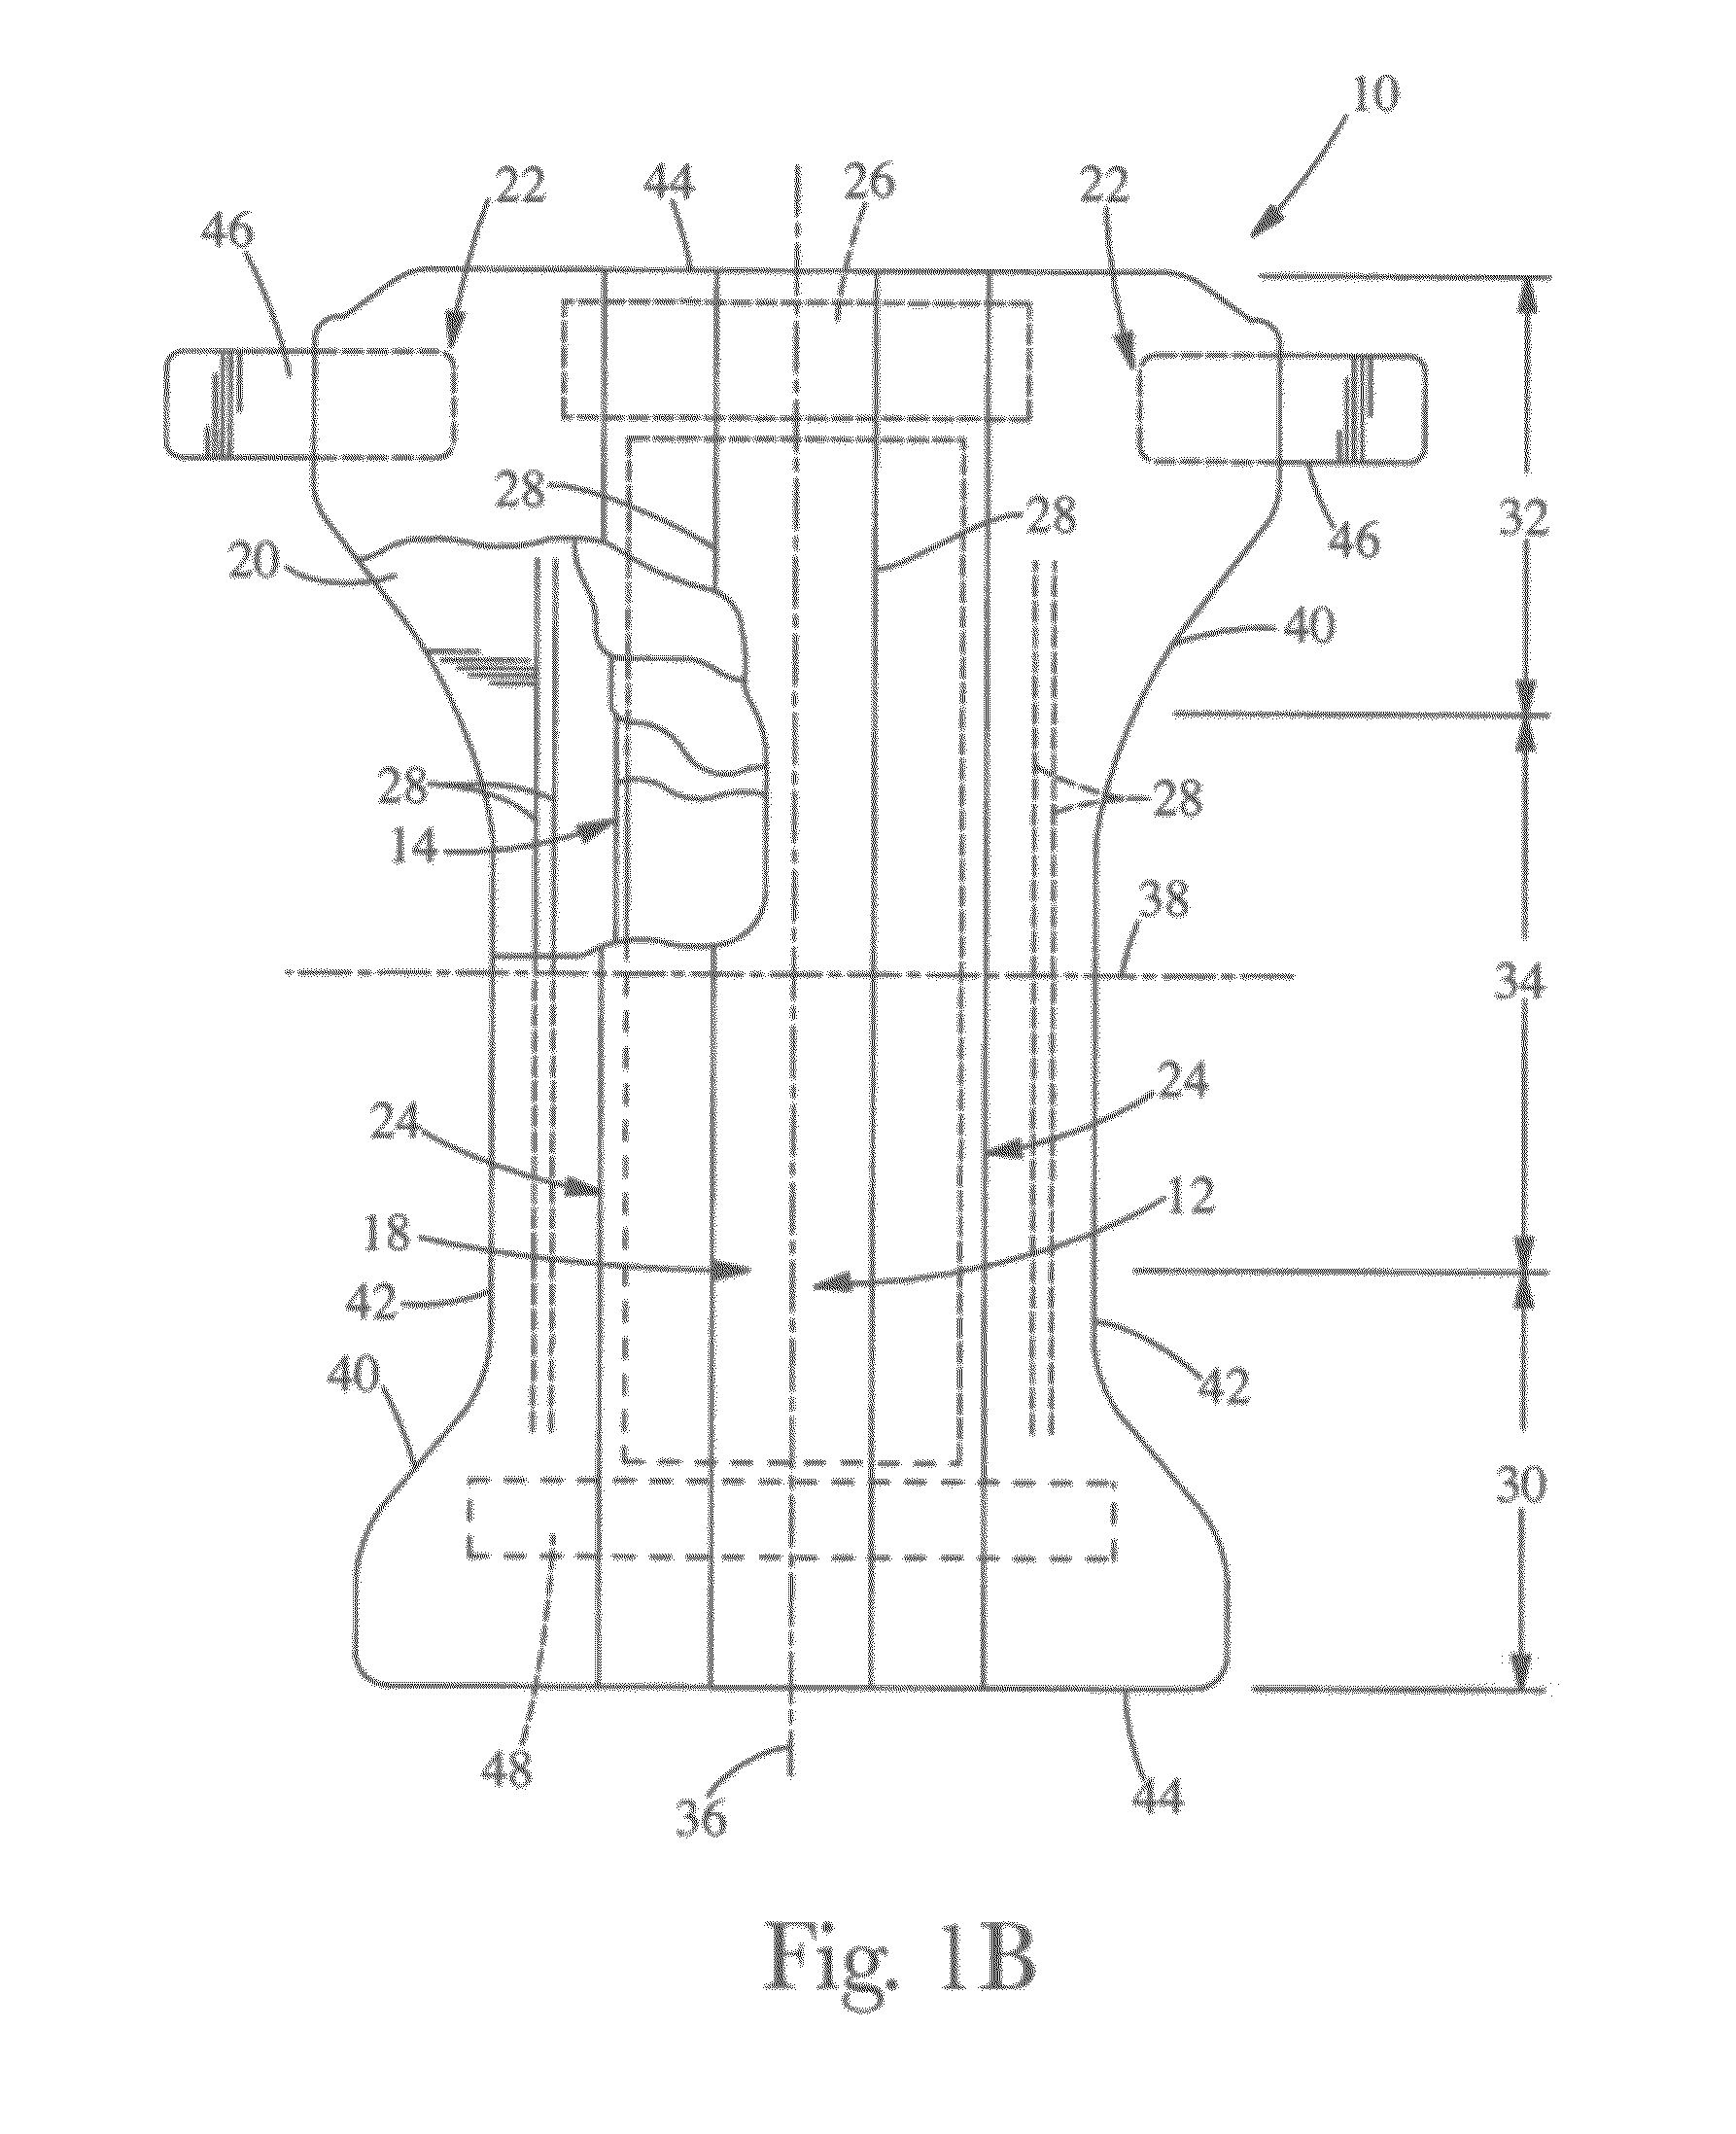 Absorbent Article and Components Thereof Having Improved Softness Signals, and Methods for Manufacturing